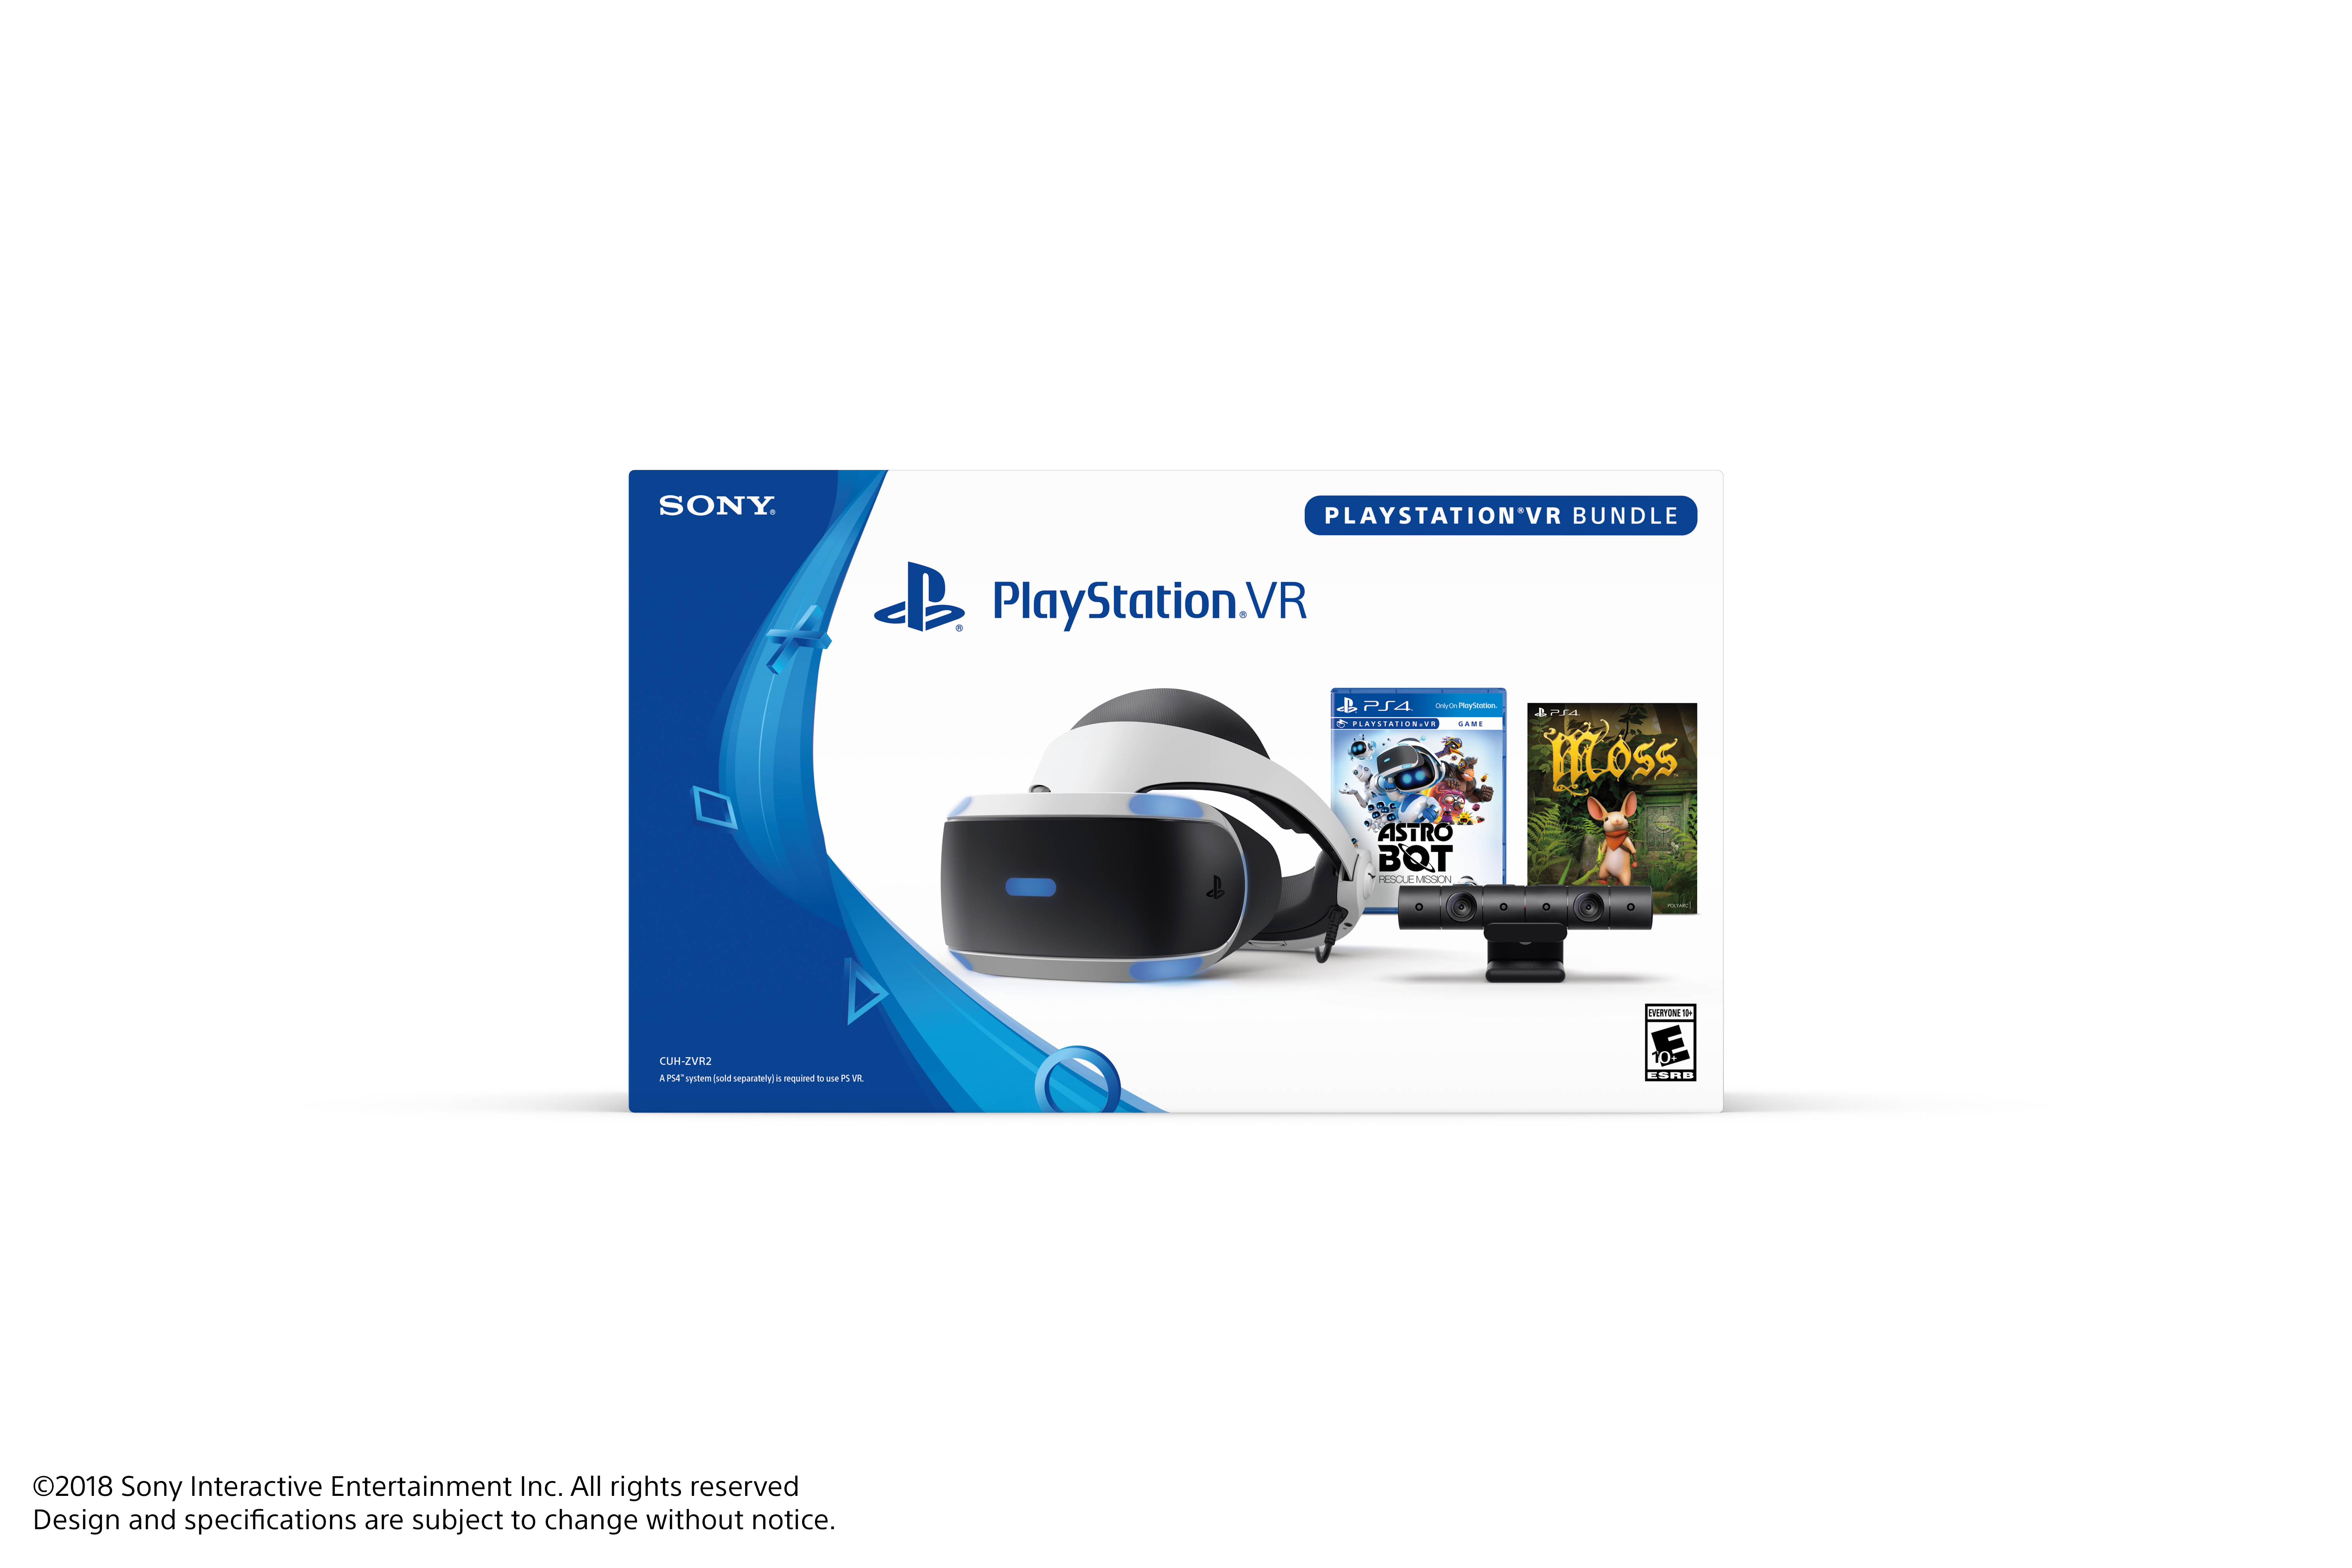 Sony PlayStation 4 VR, ASTRO BOT Rescue Mission + Moss Bundle, Black, 3003468 - image 2 of 2